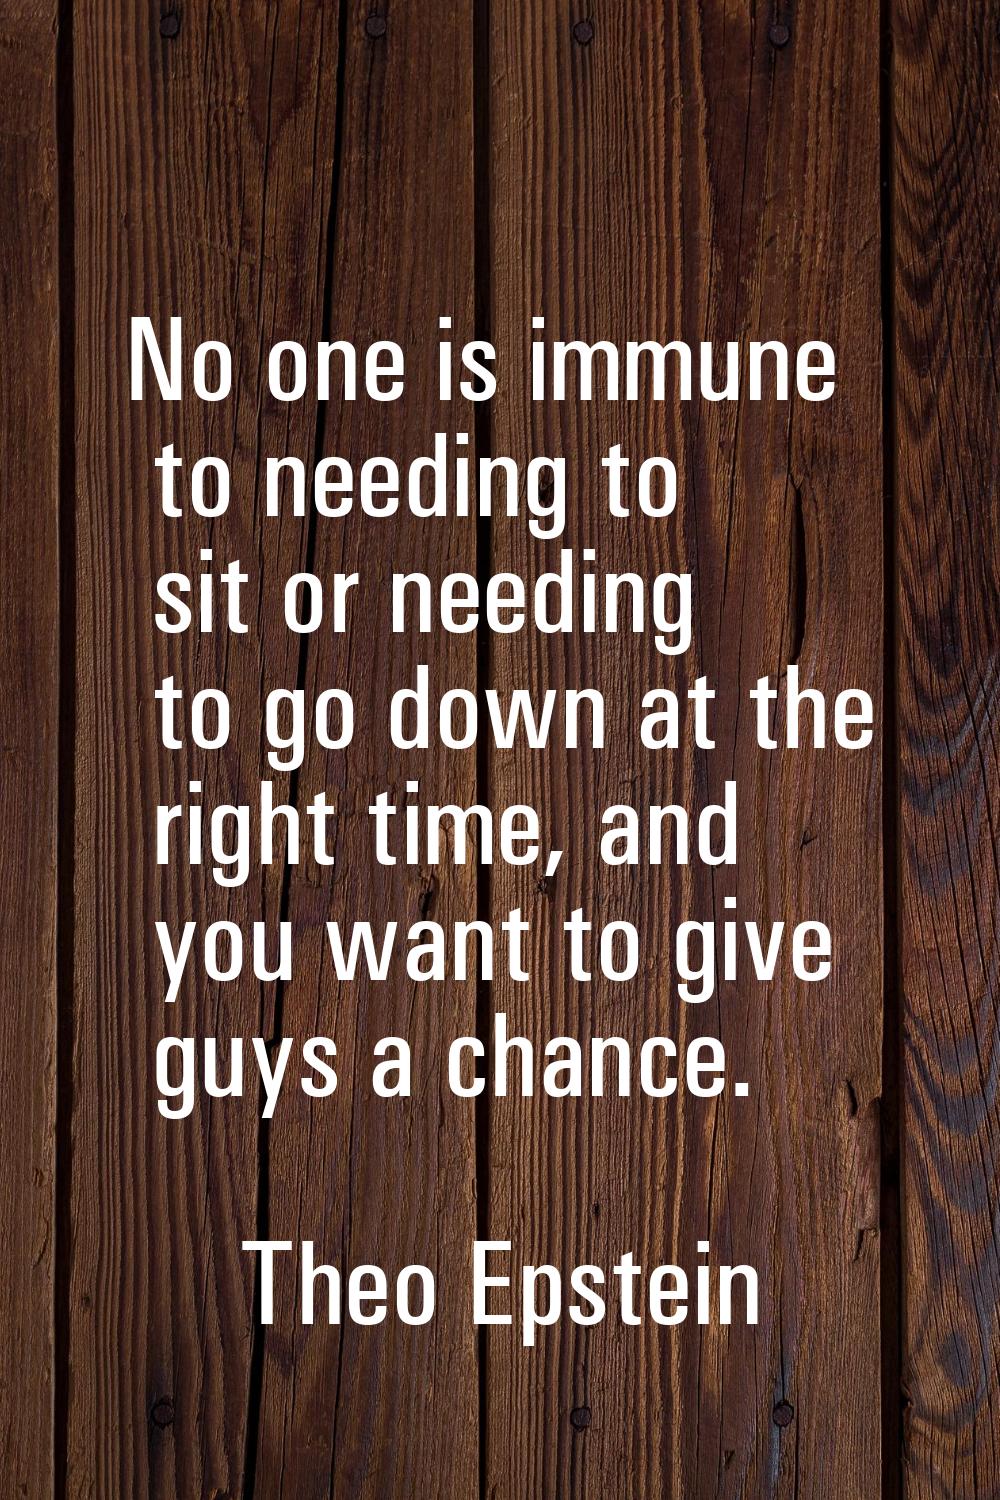 No one is immune to needing to sit or needing to go down at the right time, and you want to give gu